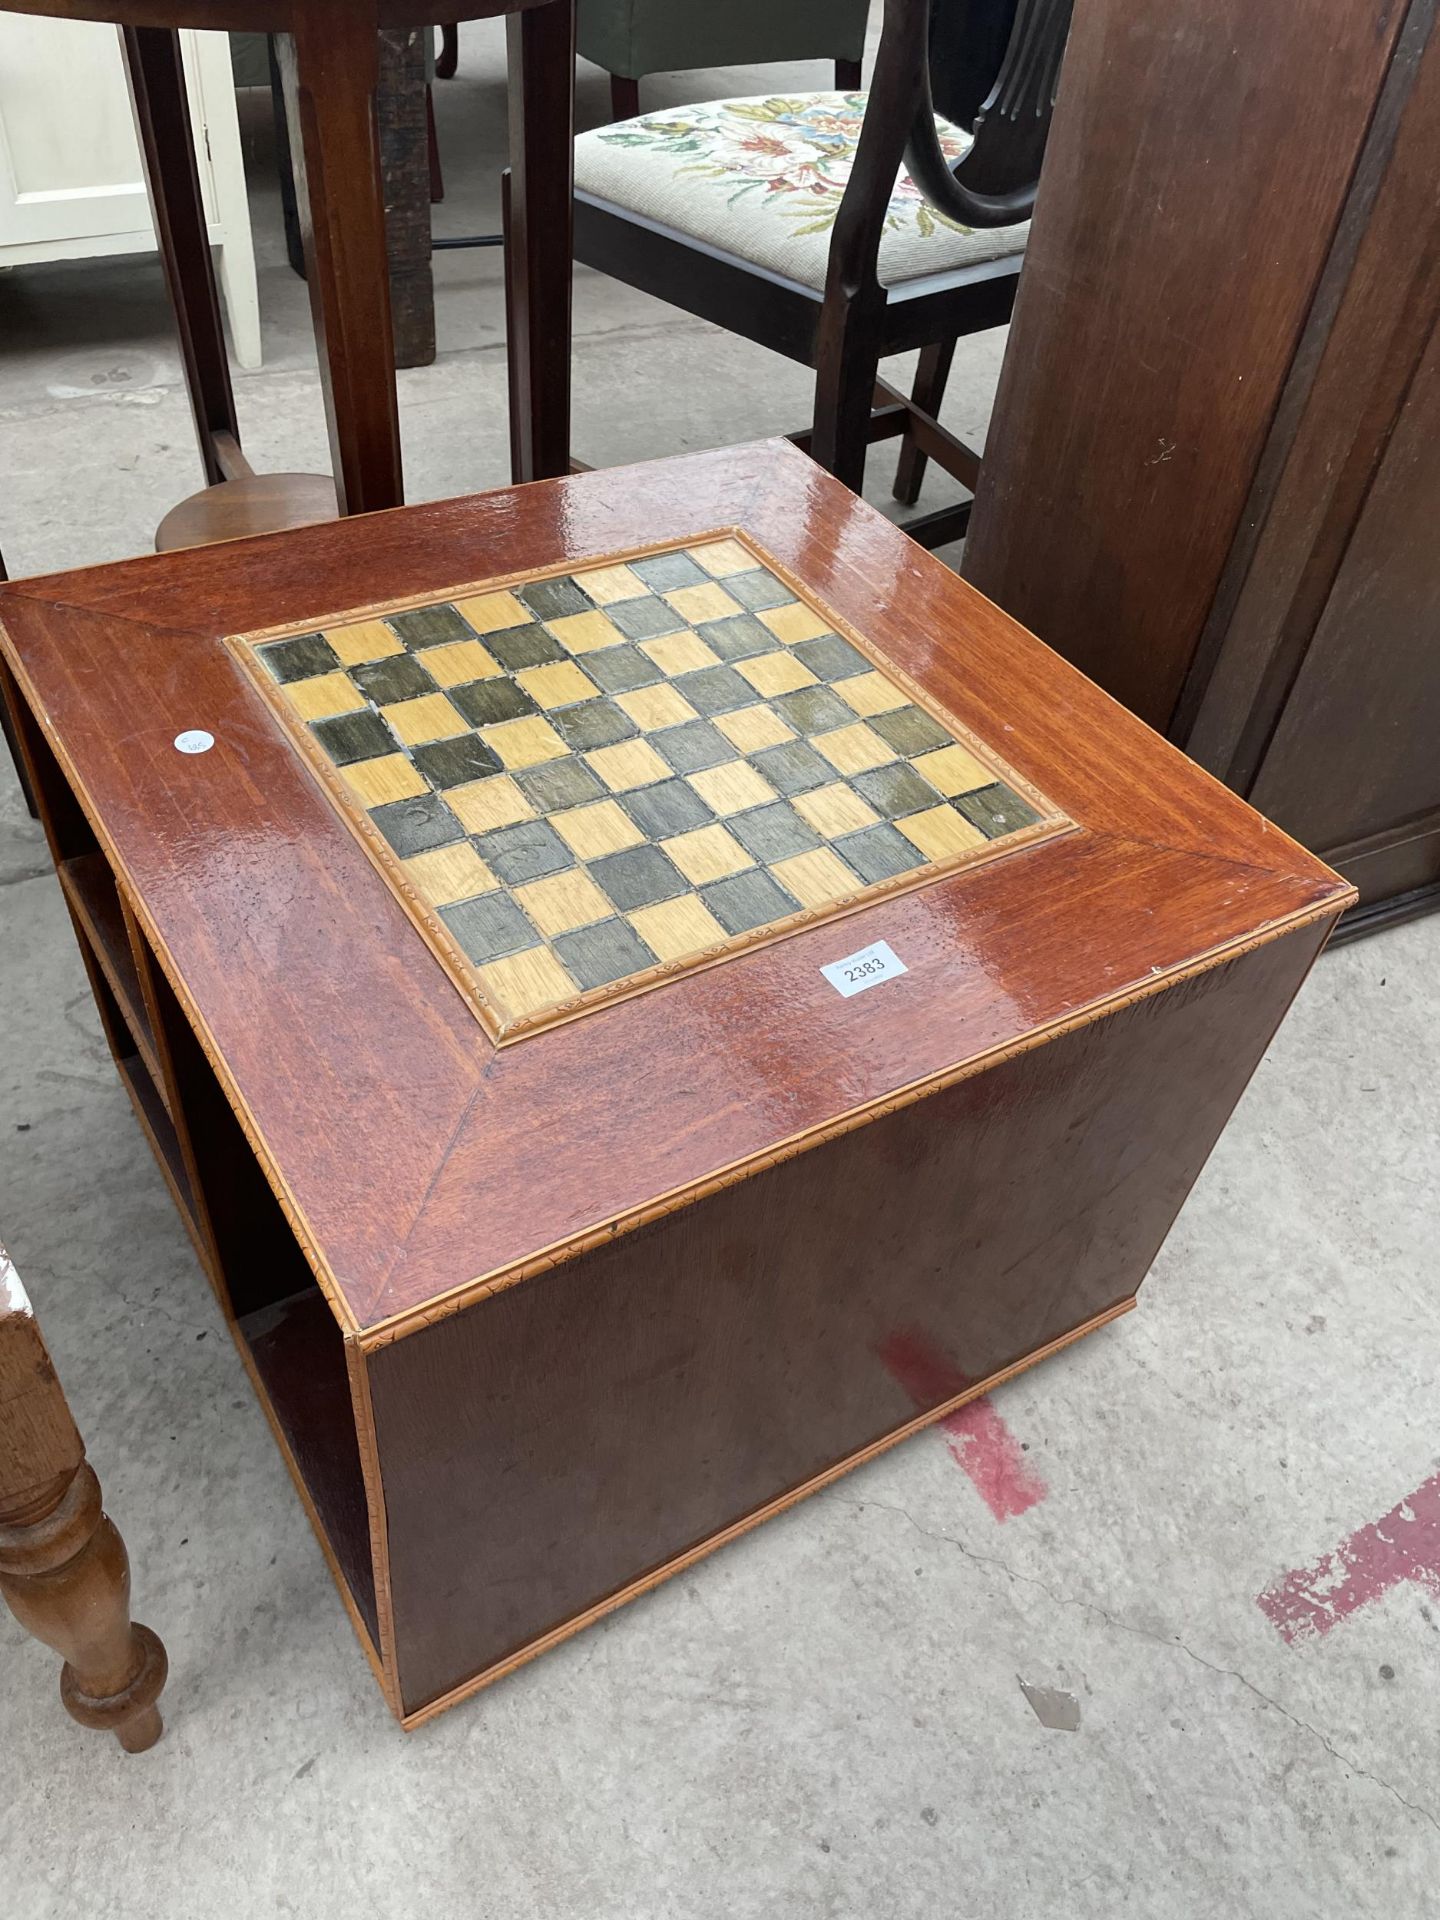 A MODERN COFFEE/CHESS TABLE, 22" SQUARE